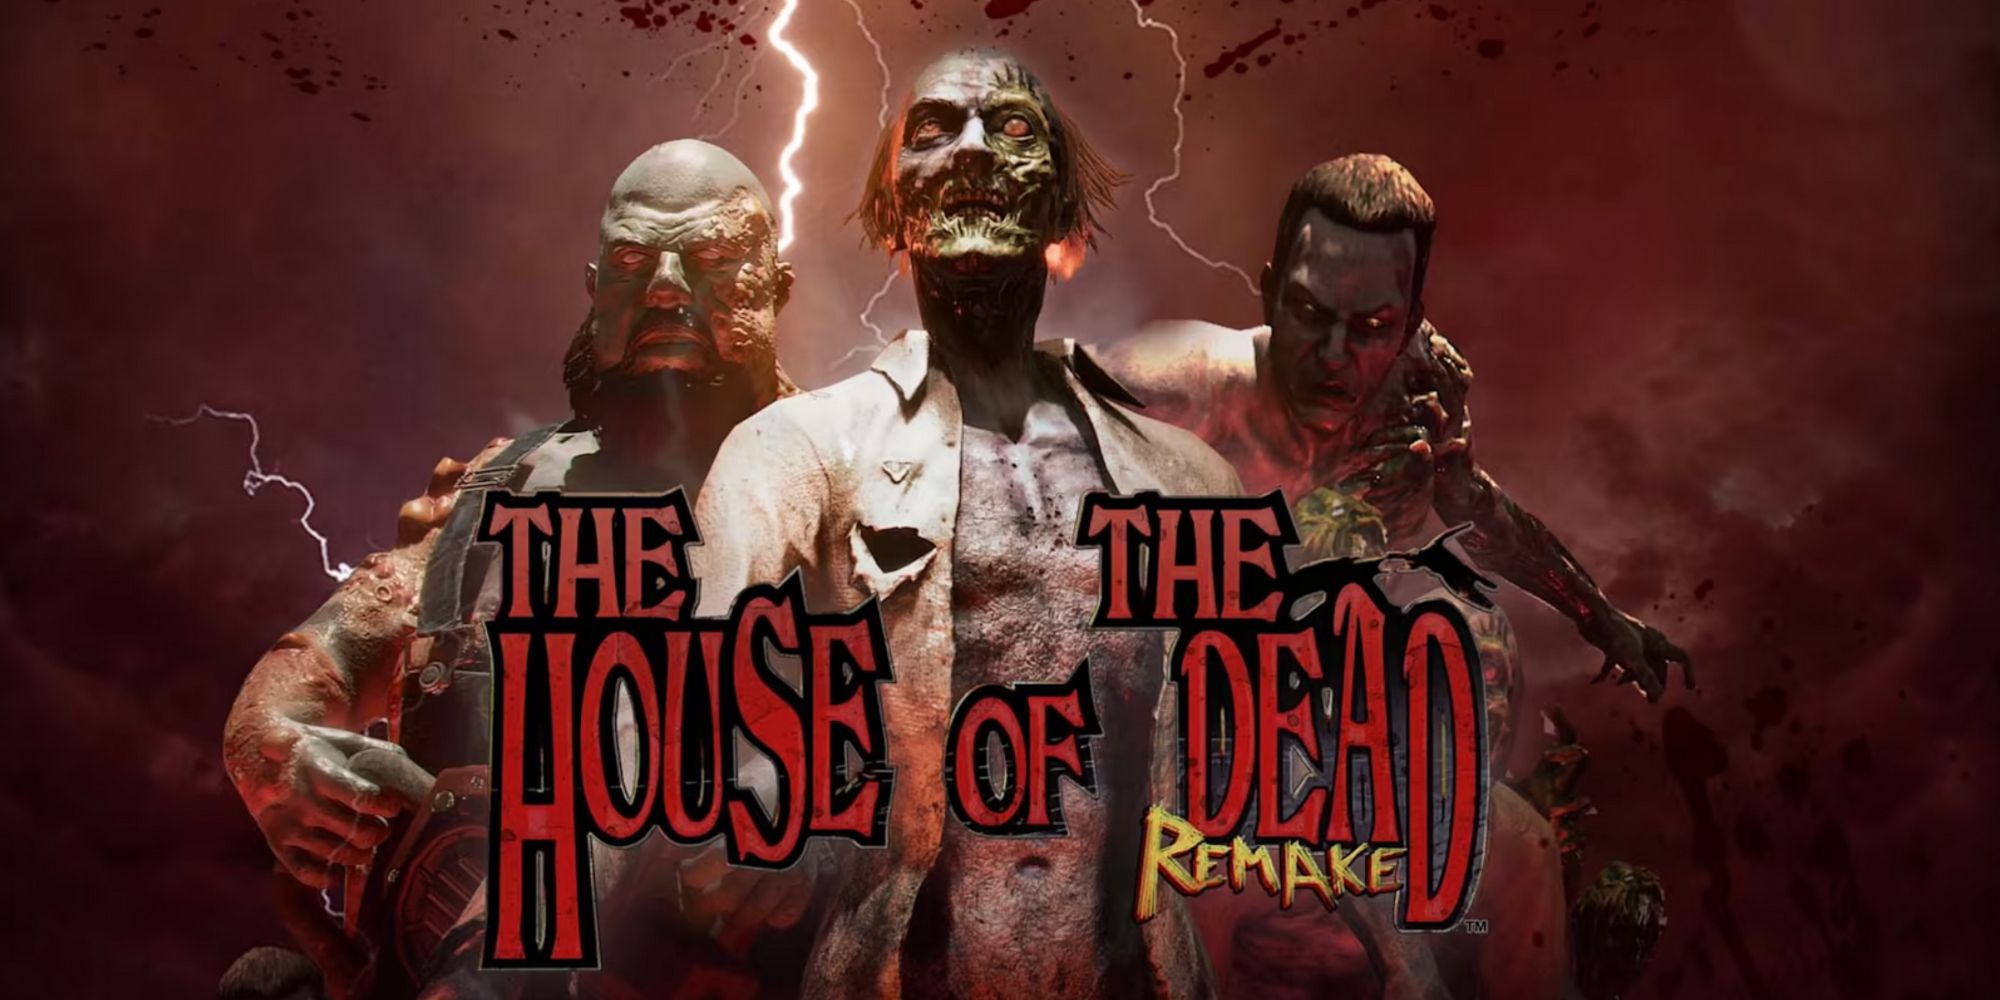 The House of the Dead remake images